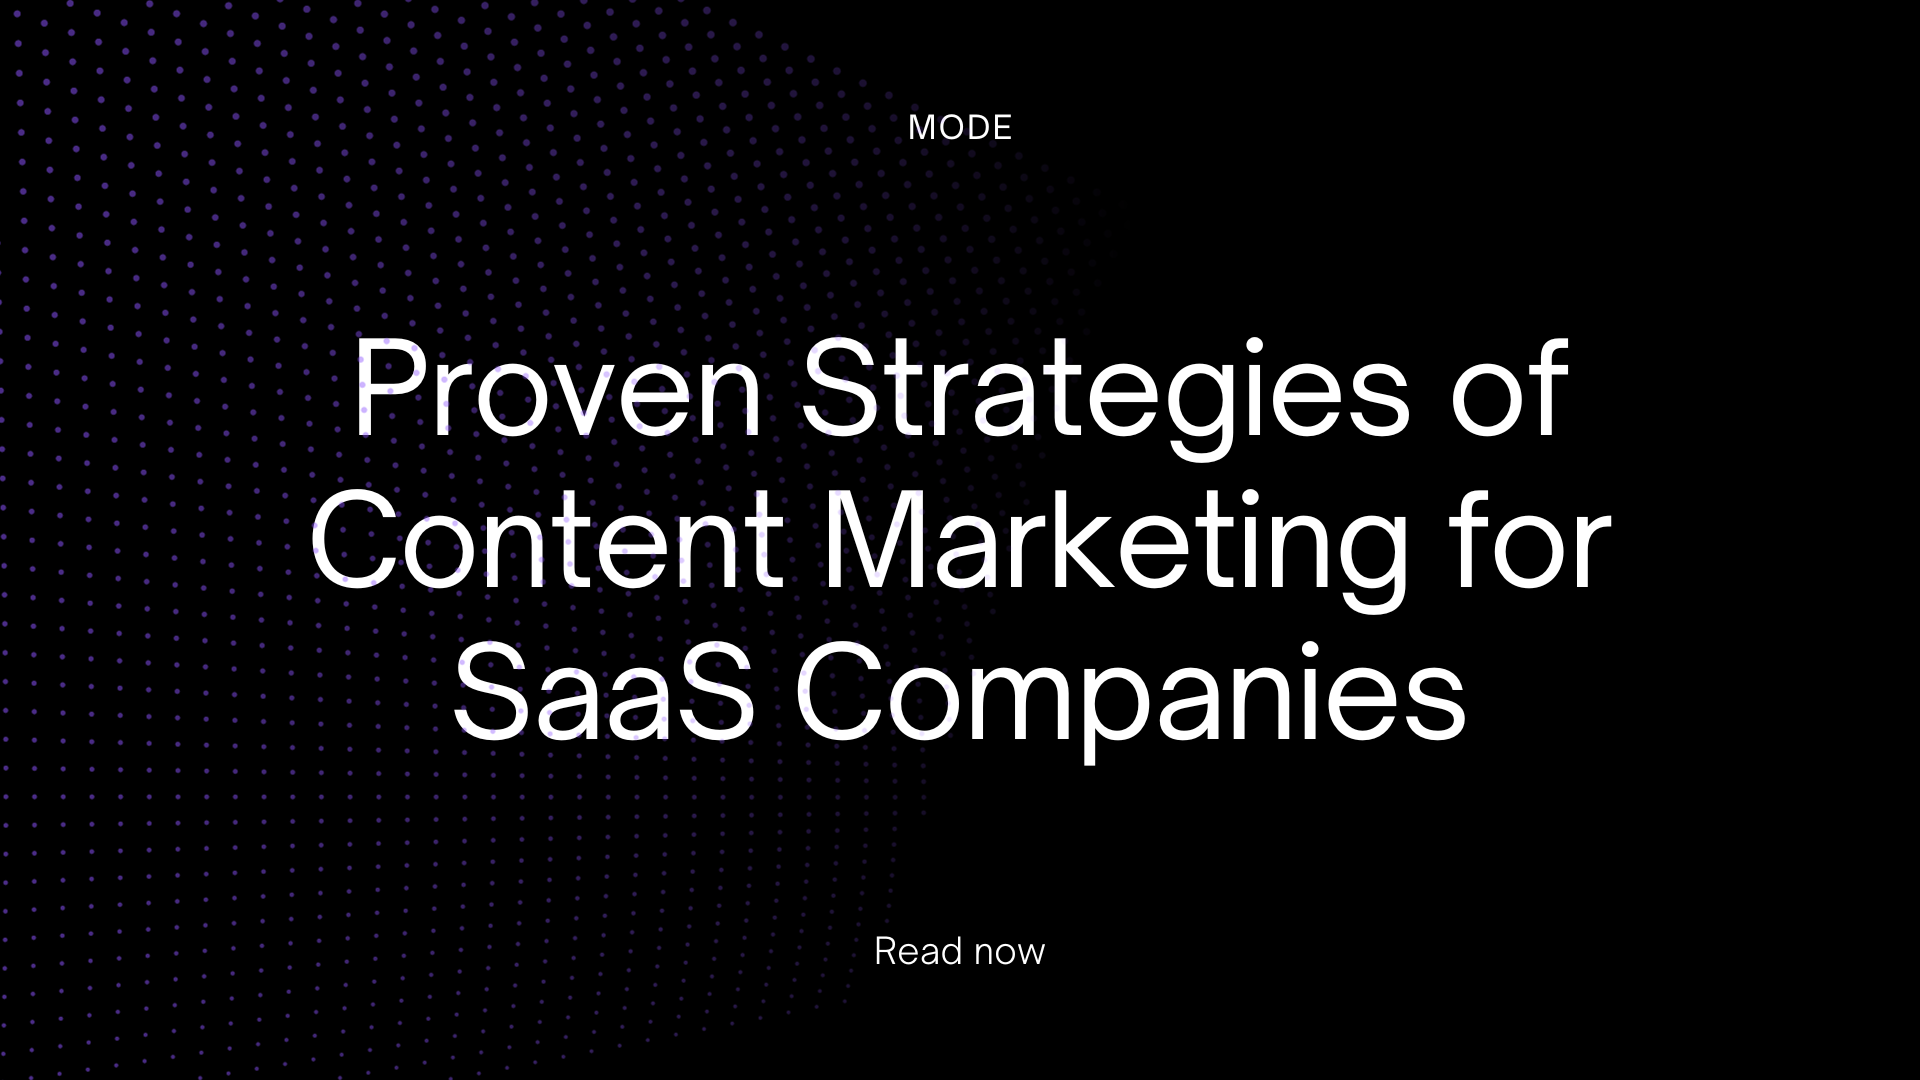 Proven Strategies of Content Marketing for SaaS Companies